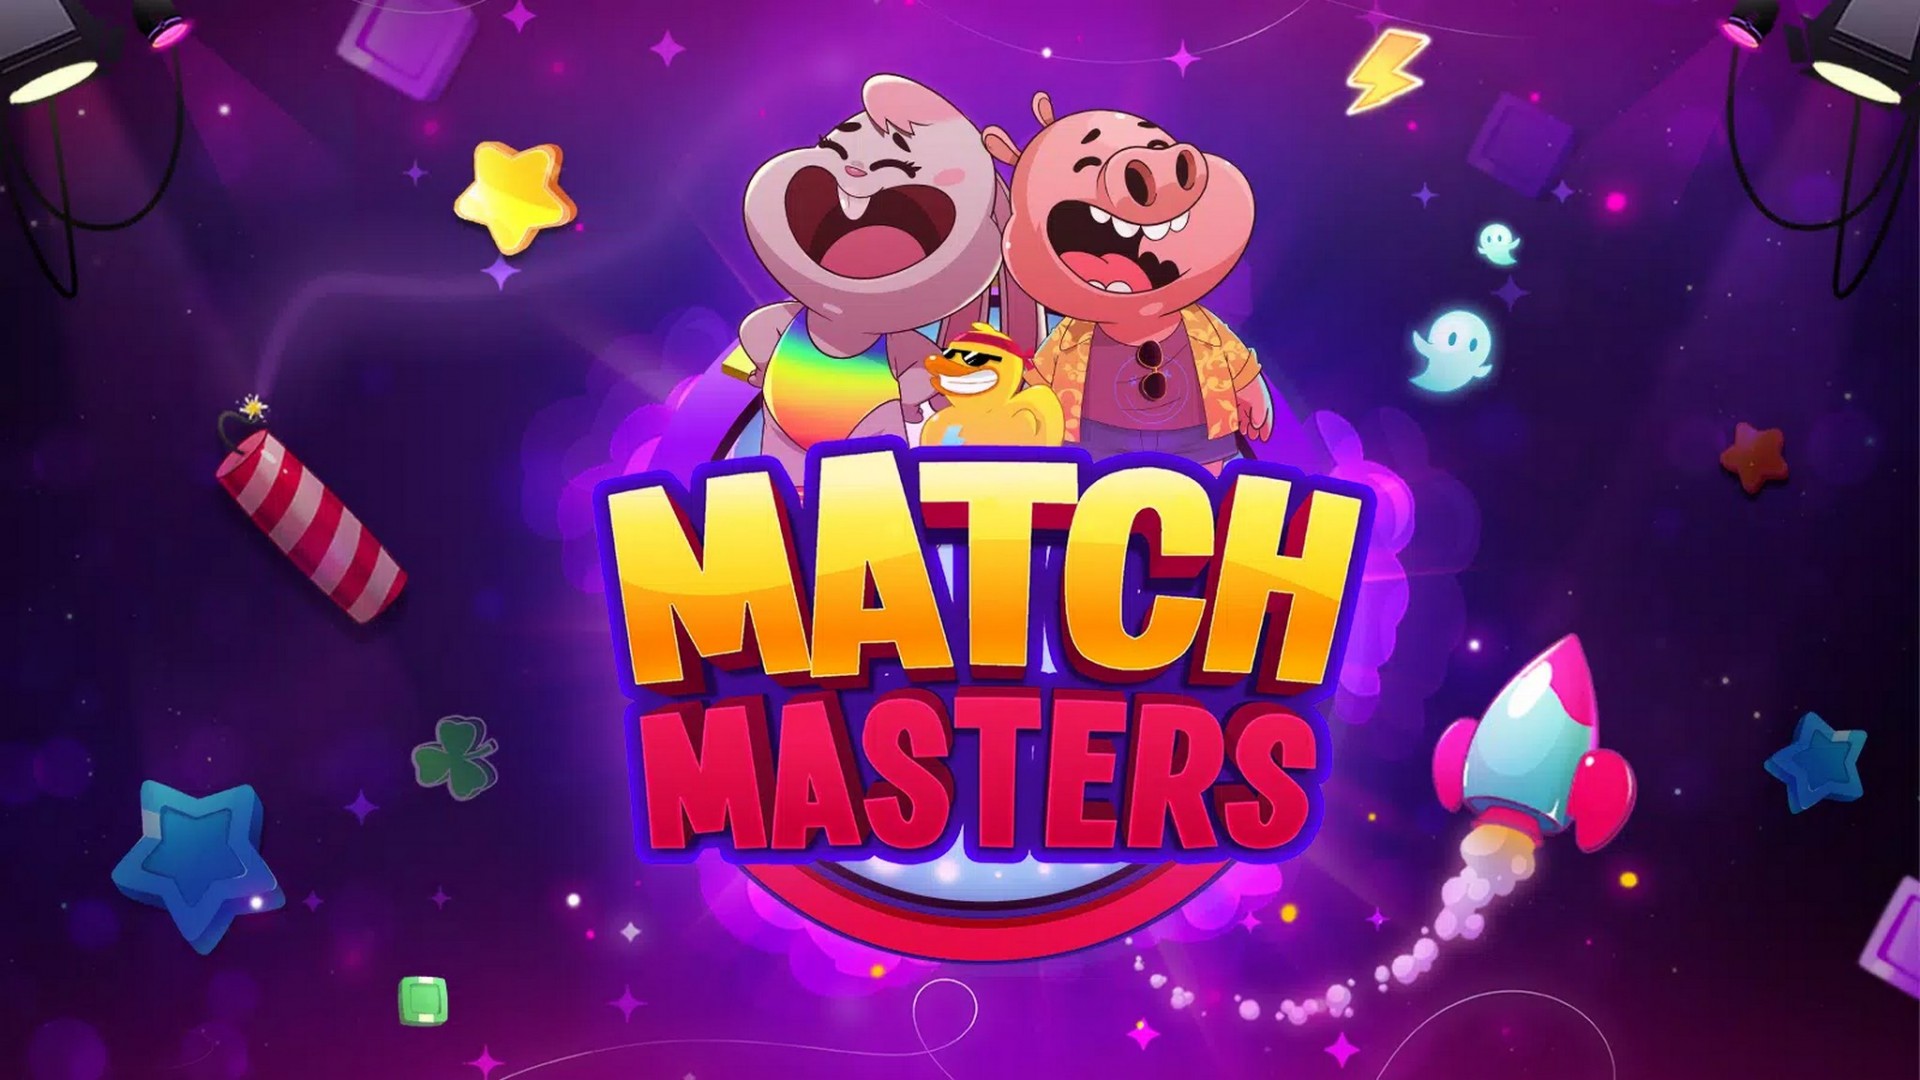 Let s play match masters. Match Masters игра. Match Masters картинки. Звезда Match Masters. Match Masters похожие игры.